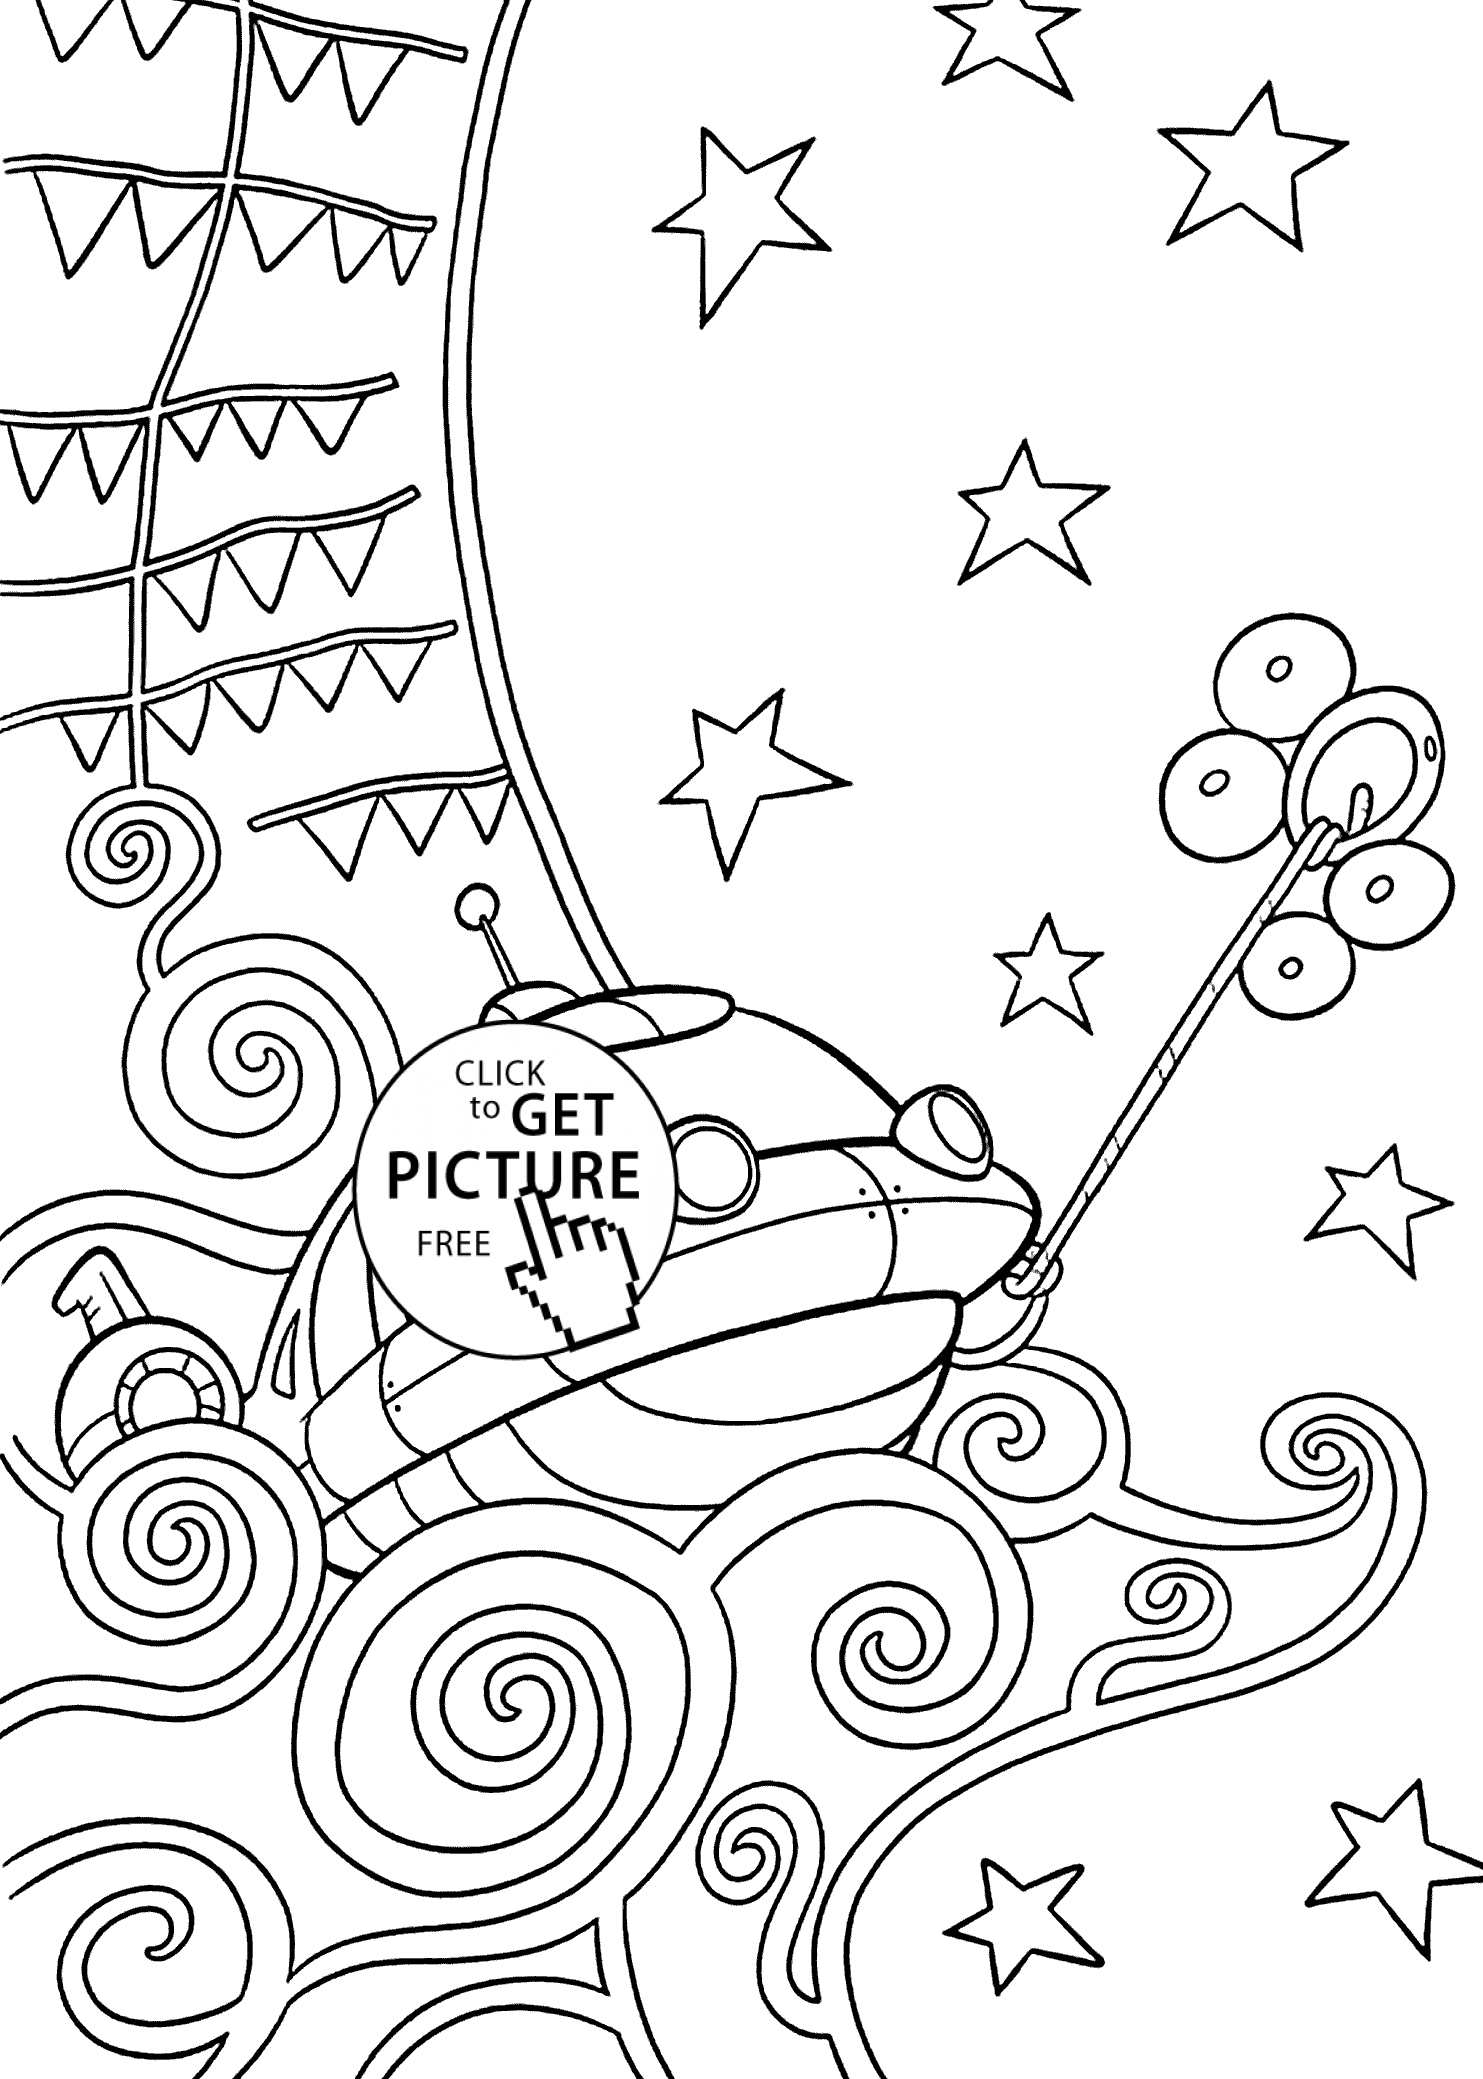 Rocket from Little Einsteins coloring pages for kids, printable free